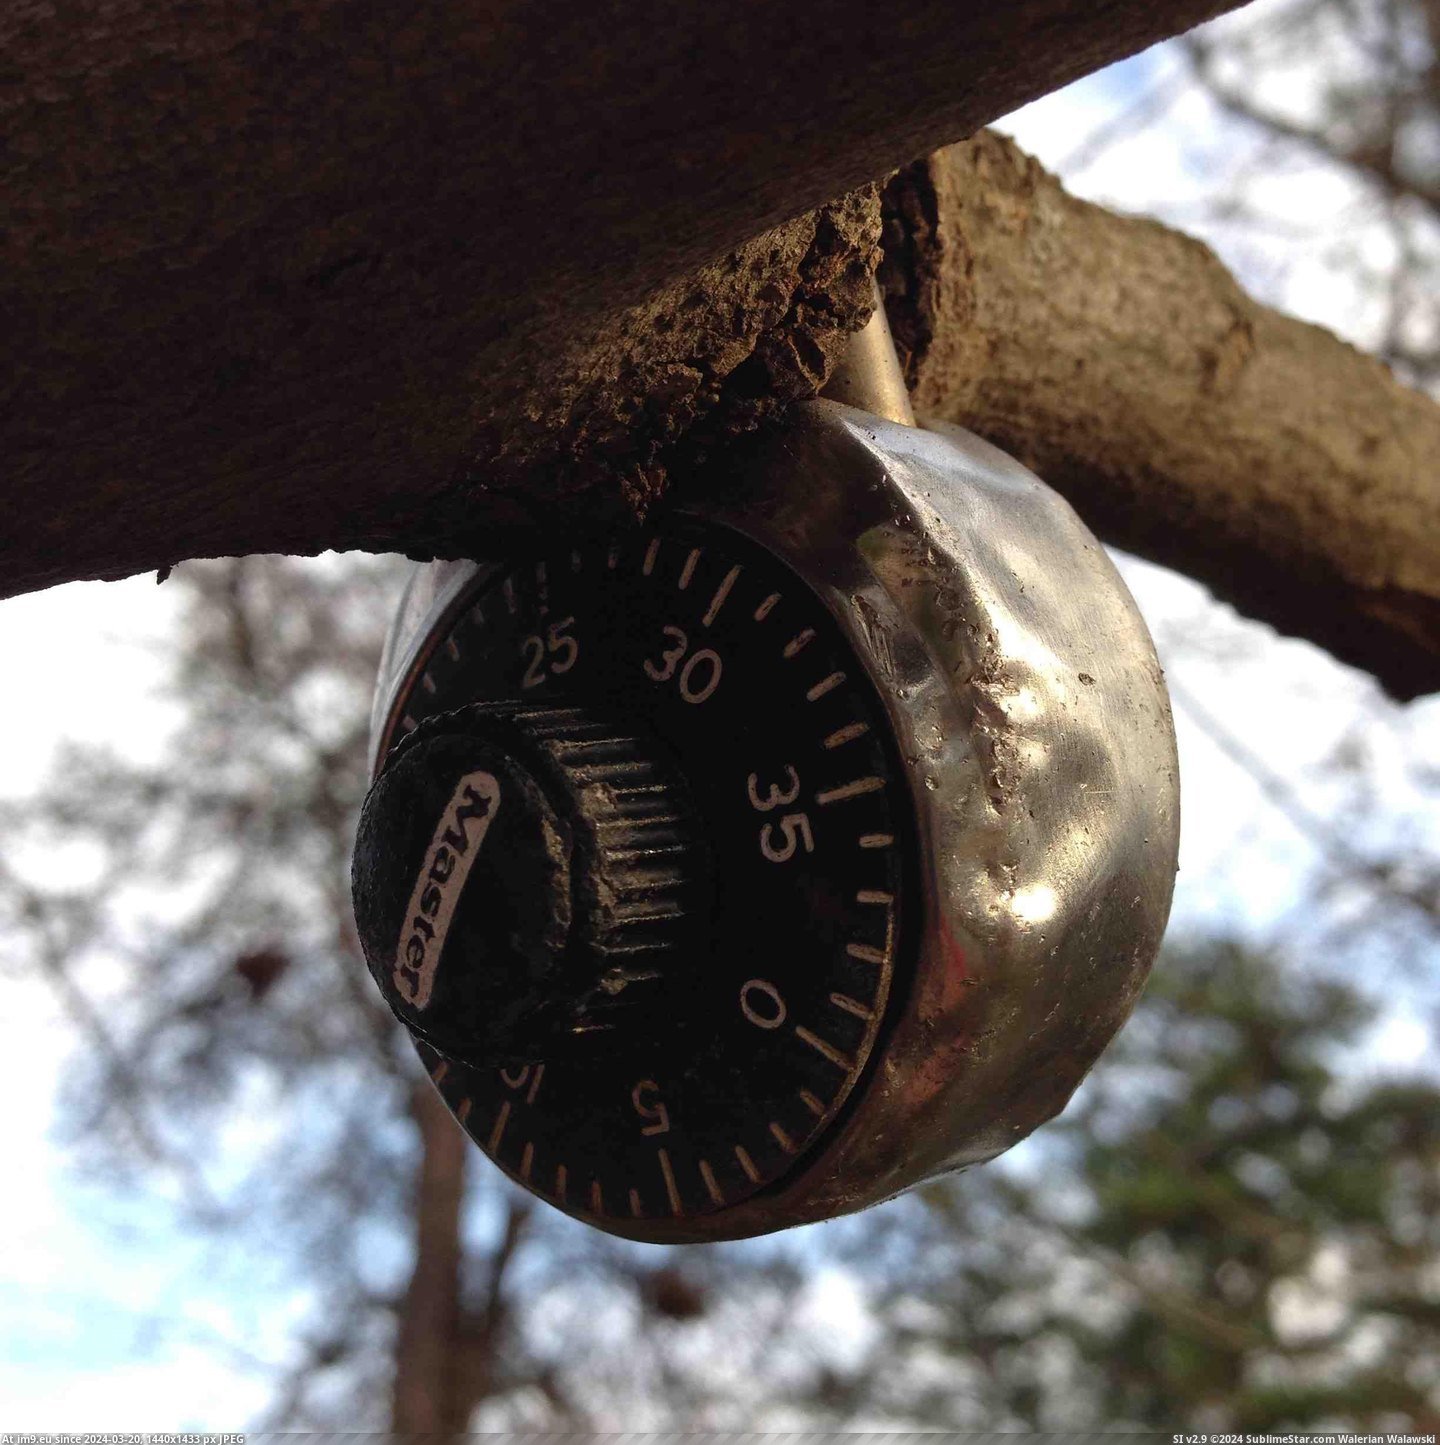 #Wtf #One #For #Code #Arm #Lock #Years #Did #Tree [Wtf] In response to the lock in the arm, this lock has been on the tree for 20 years. No one knows the code or who did it. Pic. (Bild von album My r/WTF favs))